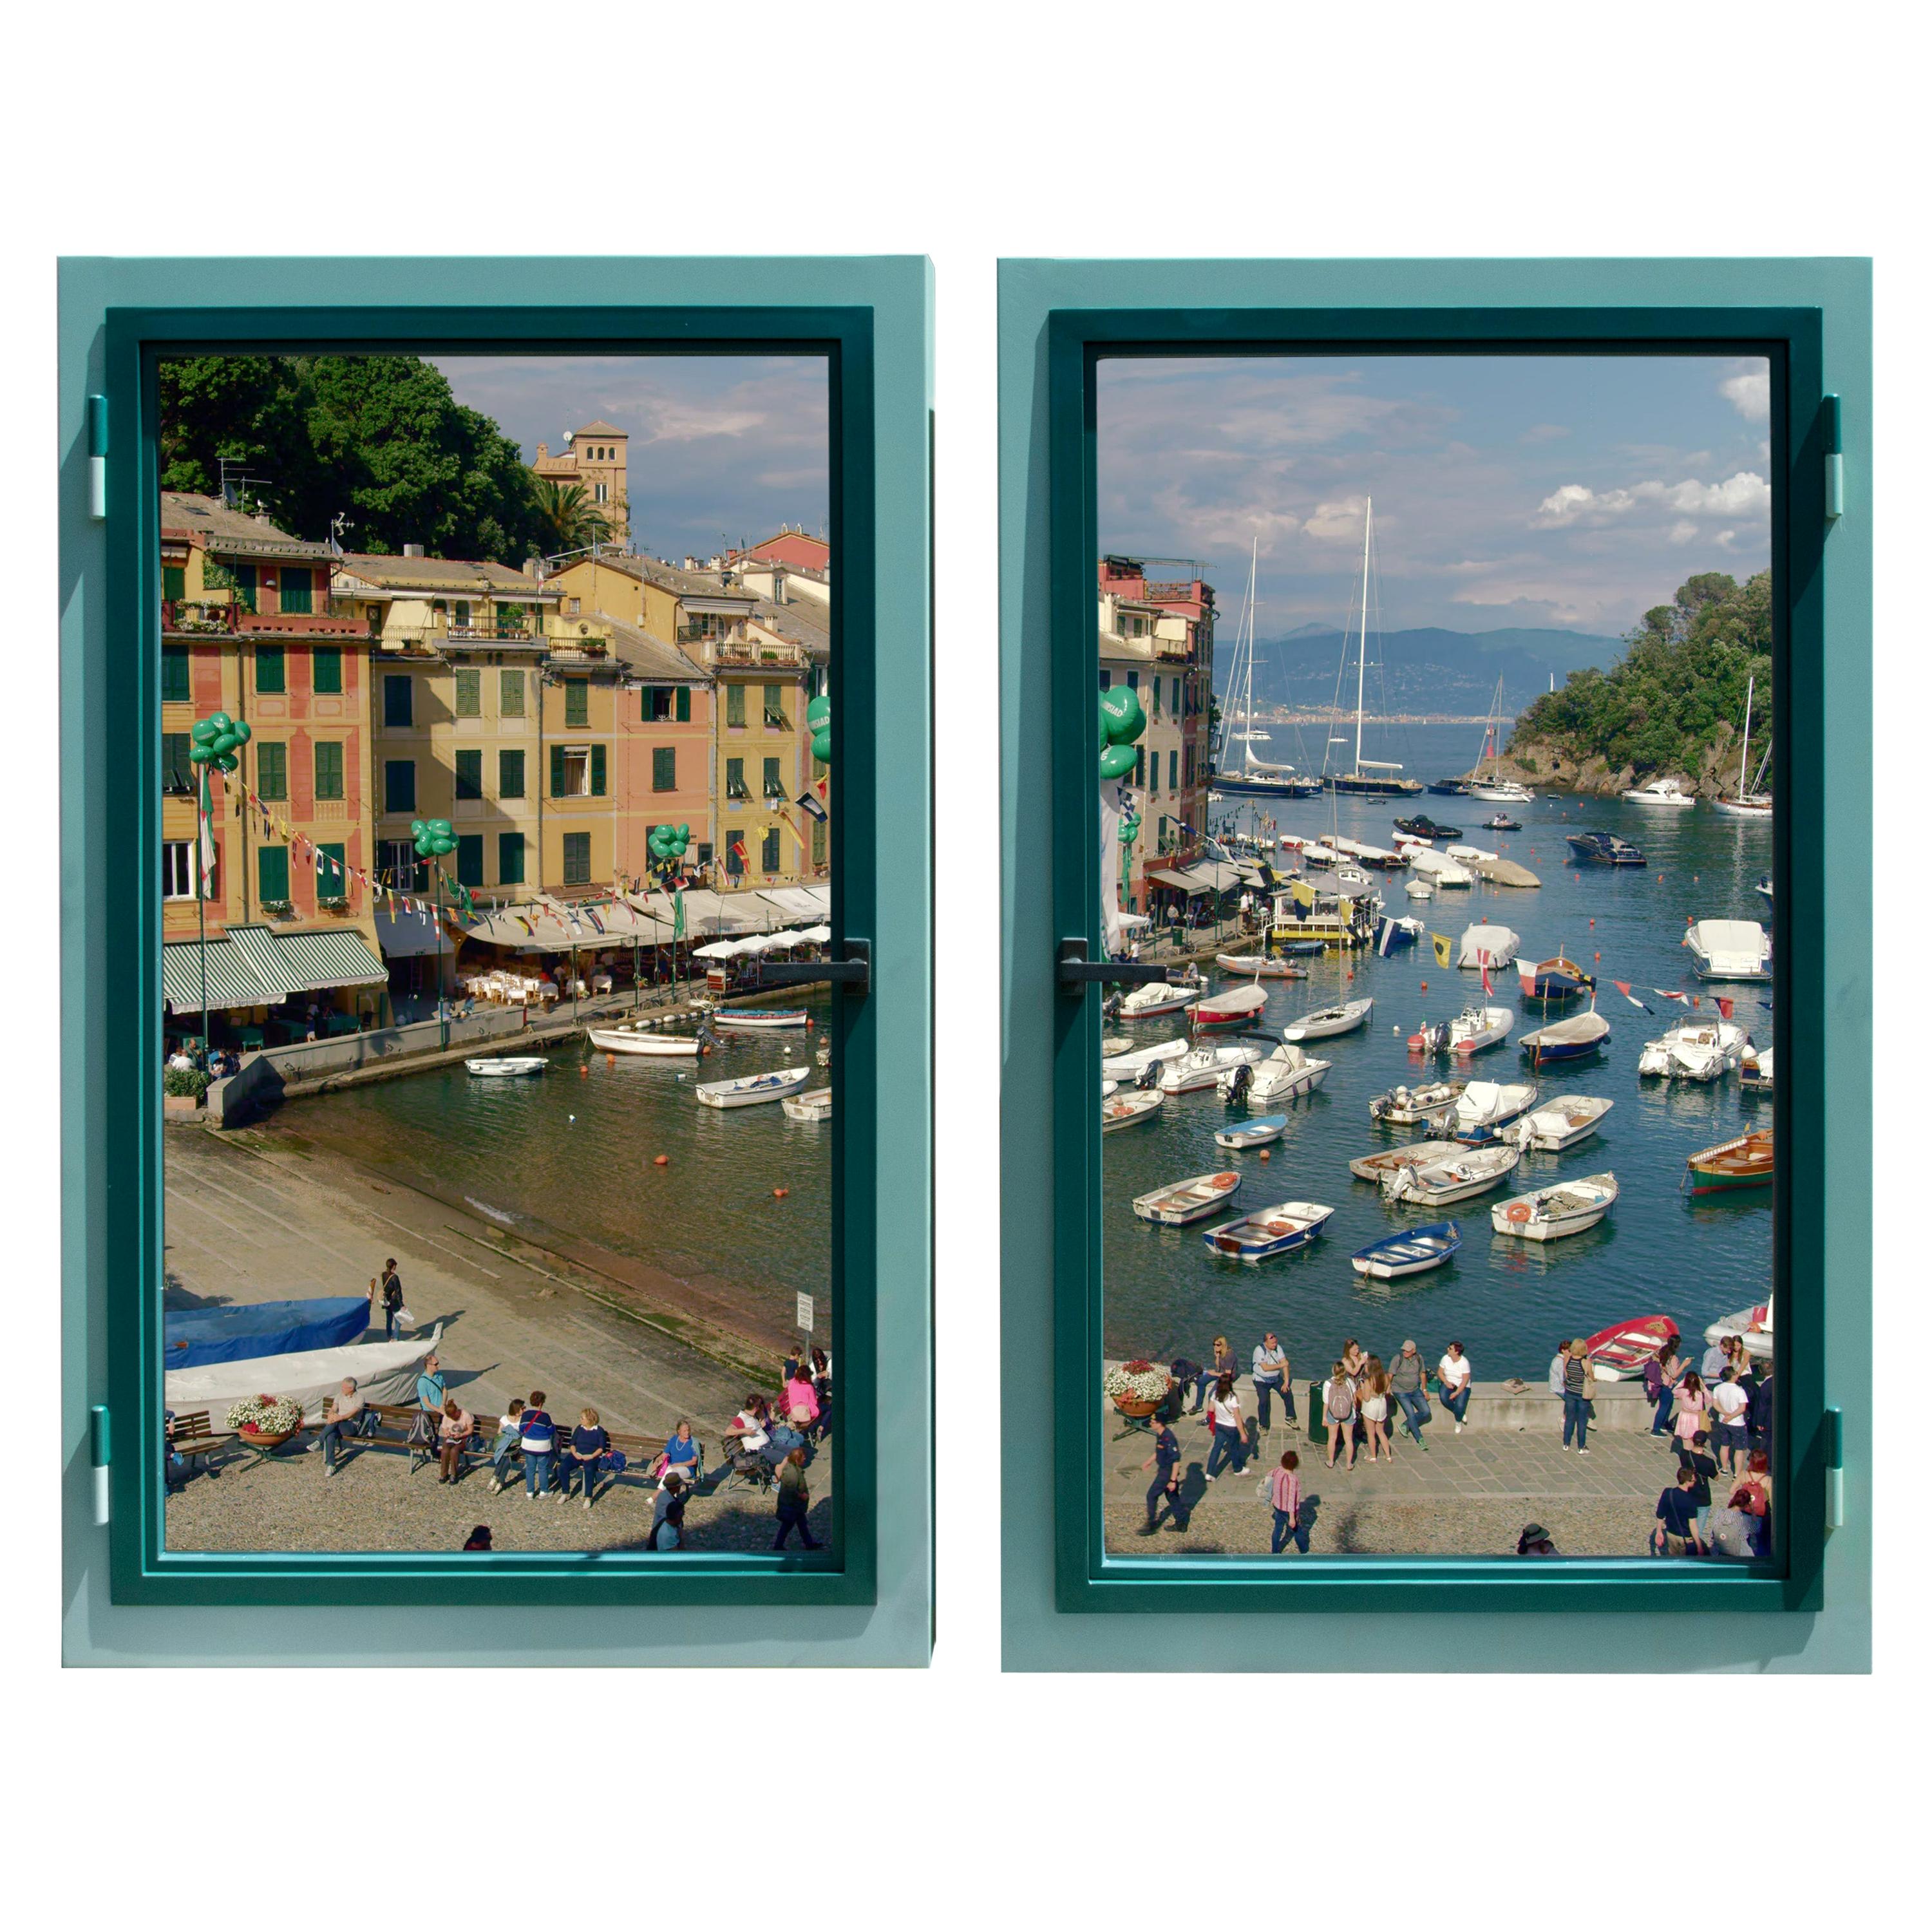 Anotherview No.13, Early Summer in Portofino, Luxury Edition by Anotherview